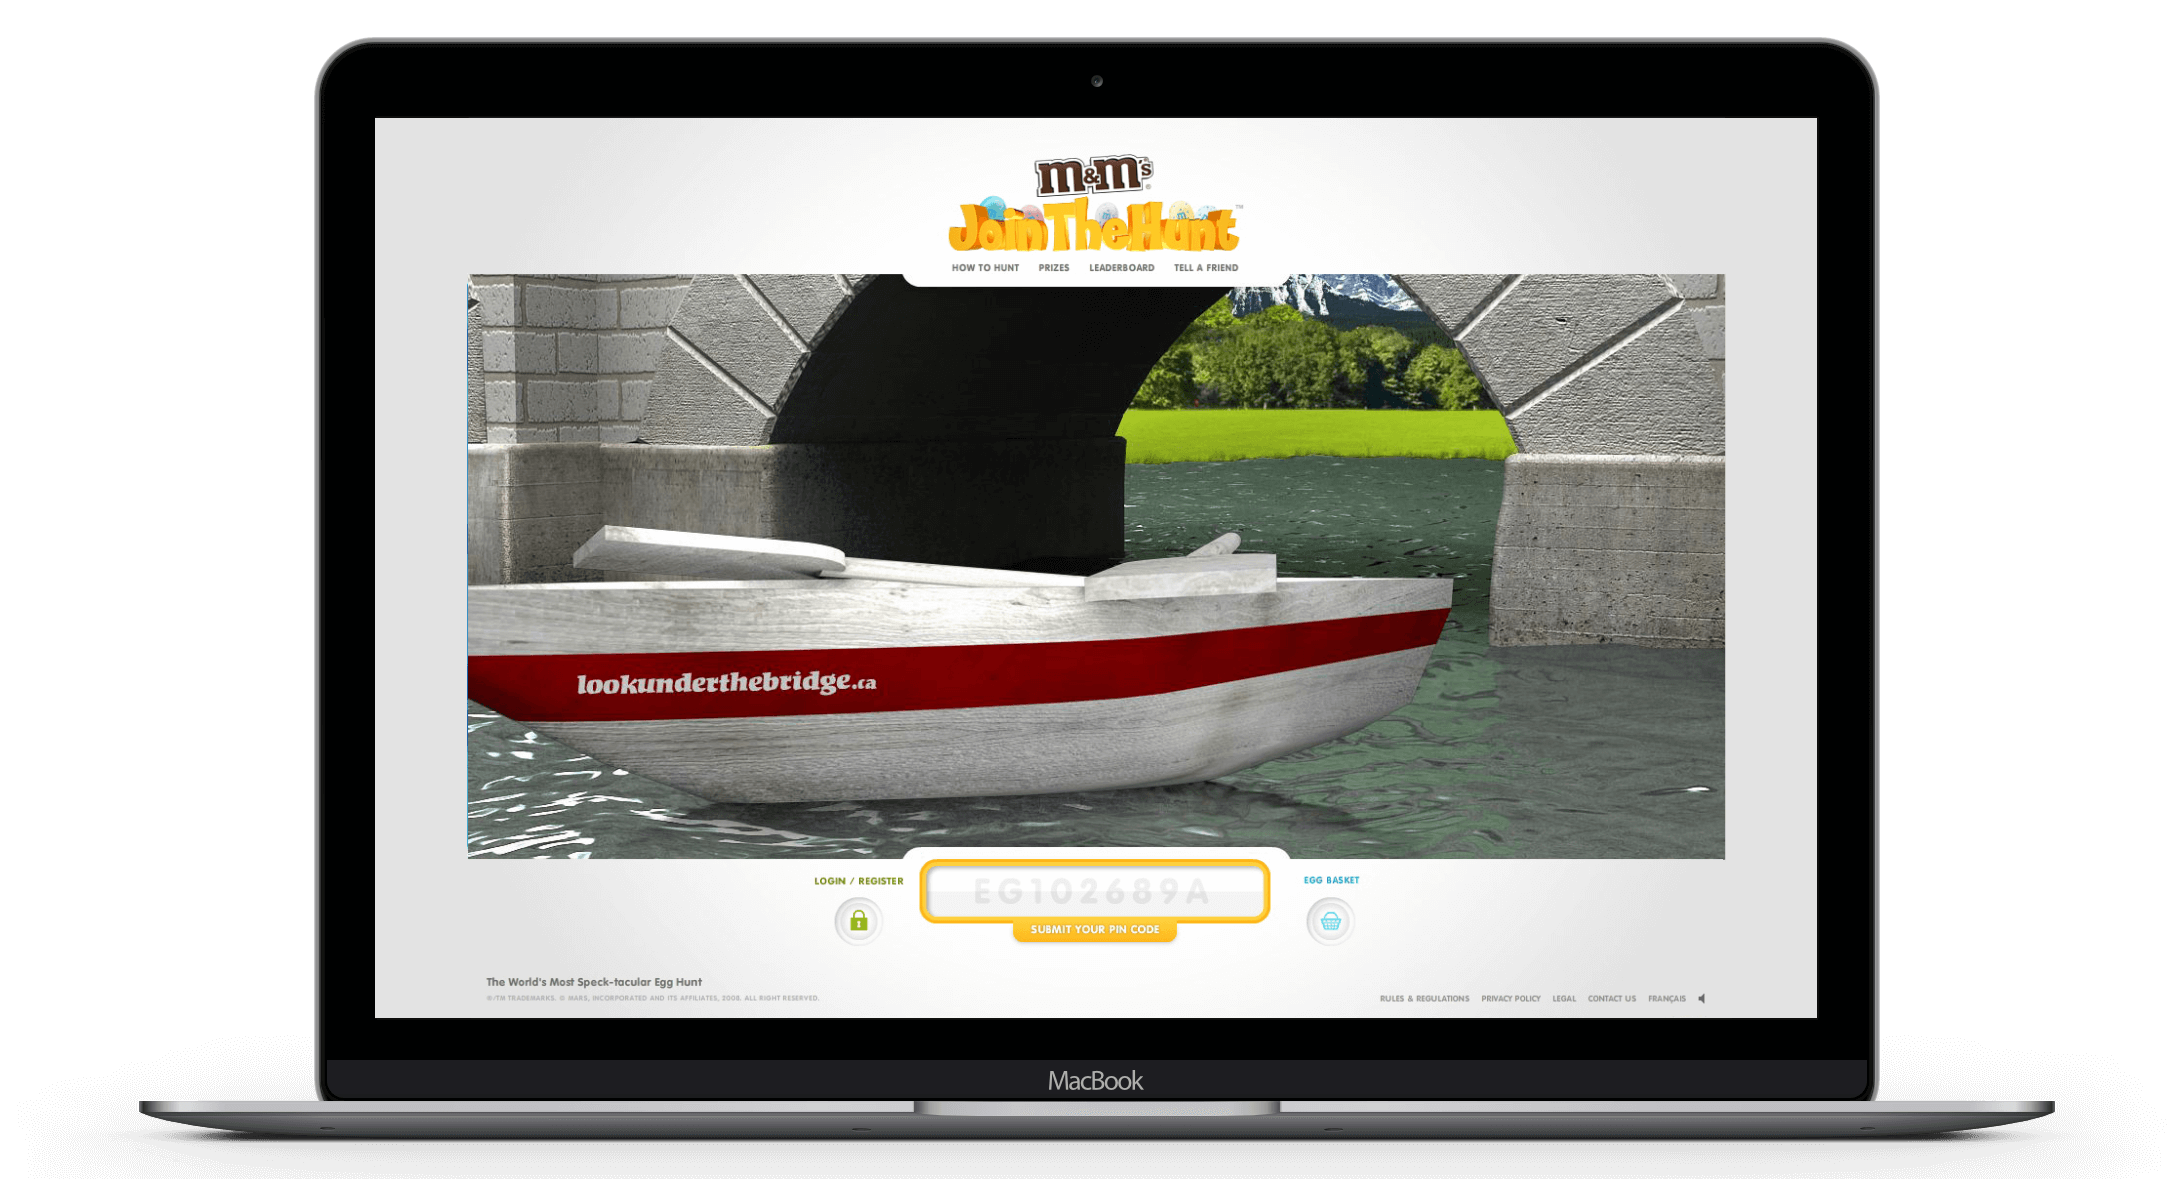 join-the-hunt-laptop-10-rowboat